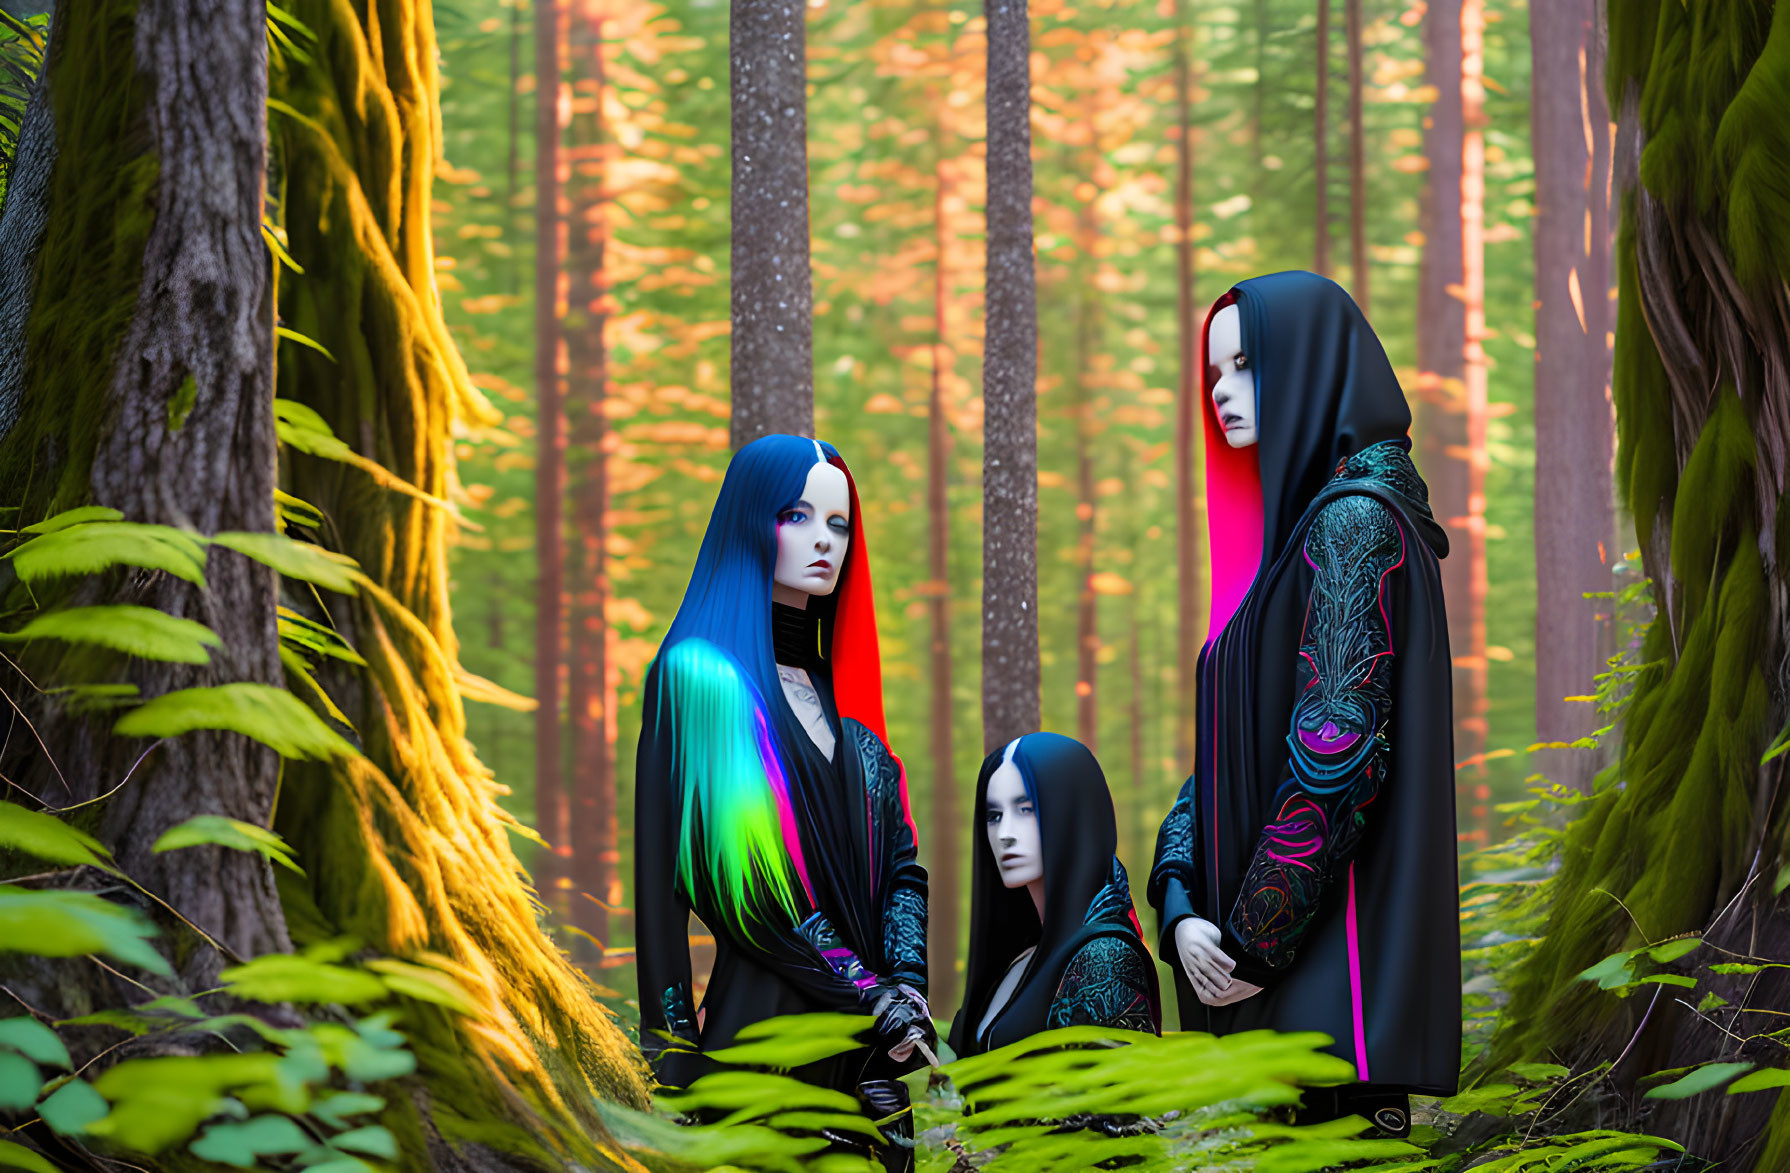 Vibrant hair and elaborate robes in serene forest setting